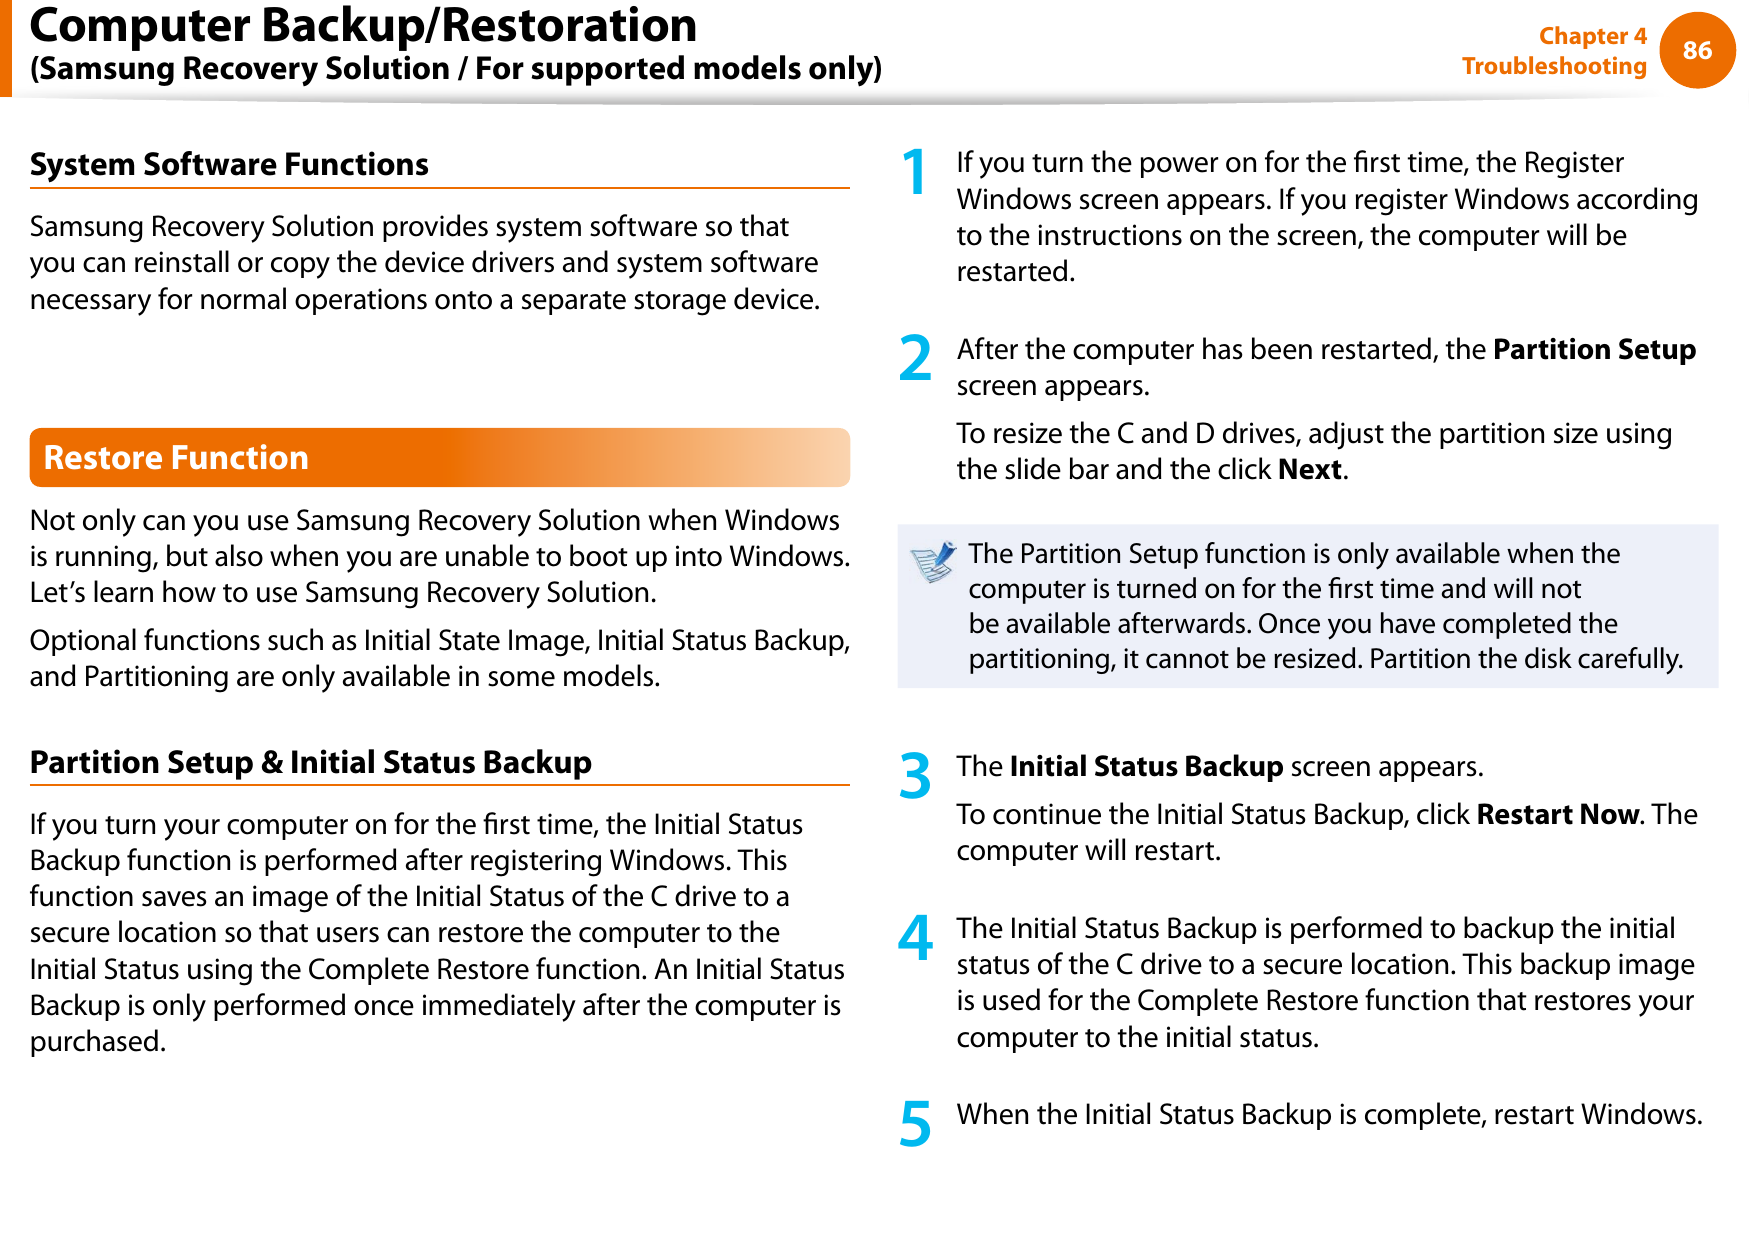 86Chapter 4 TroubleshootingSystem Software FunctionsSamsung Recovery Solution provides system software so that you can reinstall or copy the device drivers and system software necessary for normal operations onto a separate storage device.Restore FunctionNot only can you use Samsung Recovery Solution when Windows is running, but also when you are unable to boot up into Windows. Let’s learn how to use Samsung Recovery Solution.Optional functions such as Initial State Image, Initial Status Backup, and Partitioning are only available in some models.Partition Setup &amp; Initial Status BackupIf you turn your computer on for the rst time, the Initial Status Backup function is performed after registering Windows. This function saves an image of the Initial Status of the C drive to a secure location so that users can restore the computer to the Initial Status using the Complete Restore function. An Initial Status Backup is only performed once immediately after the computer is purchased.1  If you turn the power on for the rst time, the Register Windows screen appears. If you register Windows according to the instructions on the screen, the computer will be restarted.2  After the computer has been restarted, the Partition Setup screen appears. To resize the C and D drives, adjust the partition size using the slide bar and the click Next.The Partition Setup function is only available when the computer is turned on for the rst time and will not be available afterwards. Once you have completed the partitioning, it cannot be resized. Partition the disk carefully.3  The Initial Status Backup screen appears. To continue the Initial Status Backup, click Restart Now. The computer will restart.4  The Initial Status Backup is performed to backup the initial status of the C drive to a secure location. This backup image is used for the Complete Restore function that restores your computer to the initial status.5  When the Initial Status Backup is complete, restart Windows.Computer Backup/Restoration  (Samsung Recovery Solution / For supported models only)